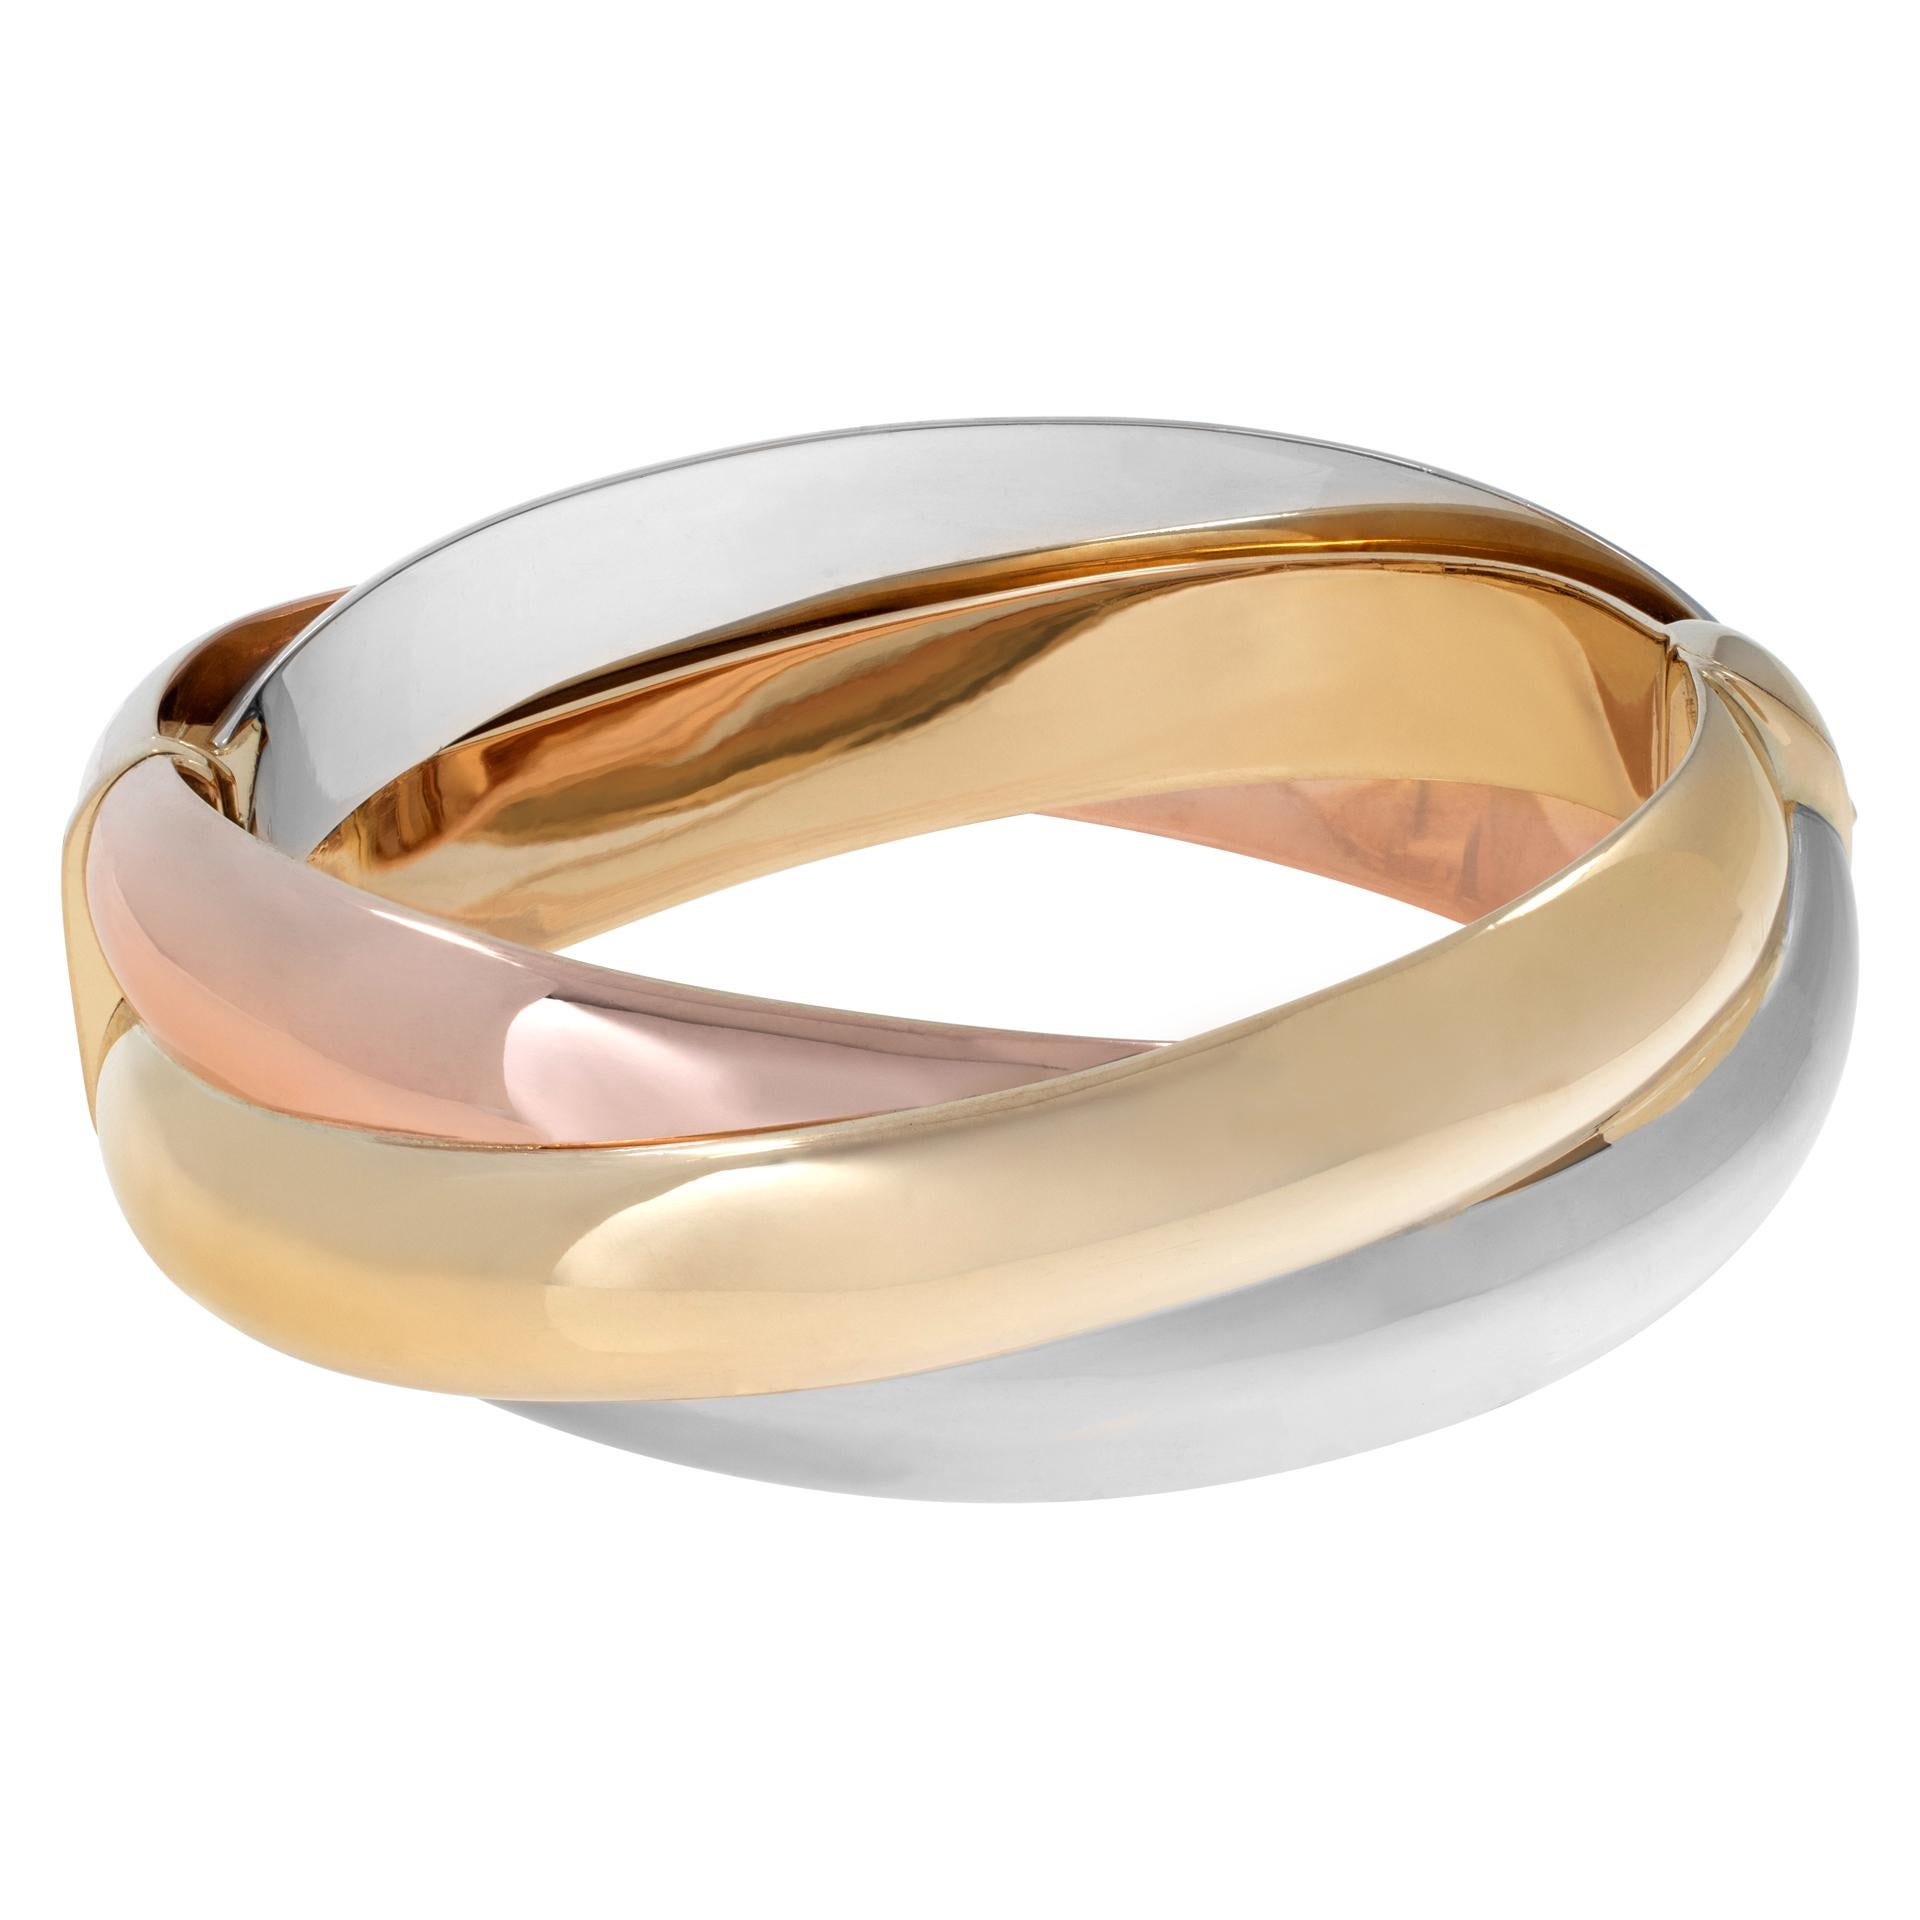 White, yellow and rose gold bangle bracelet For Sale